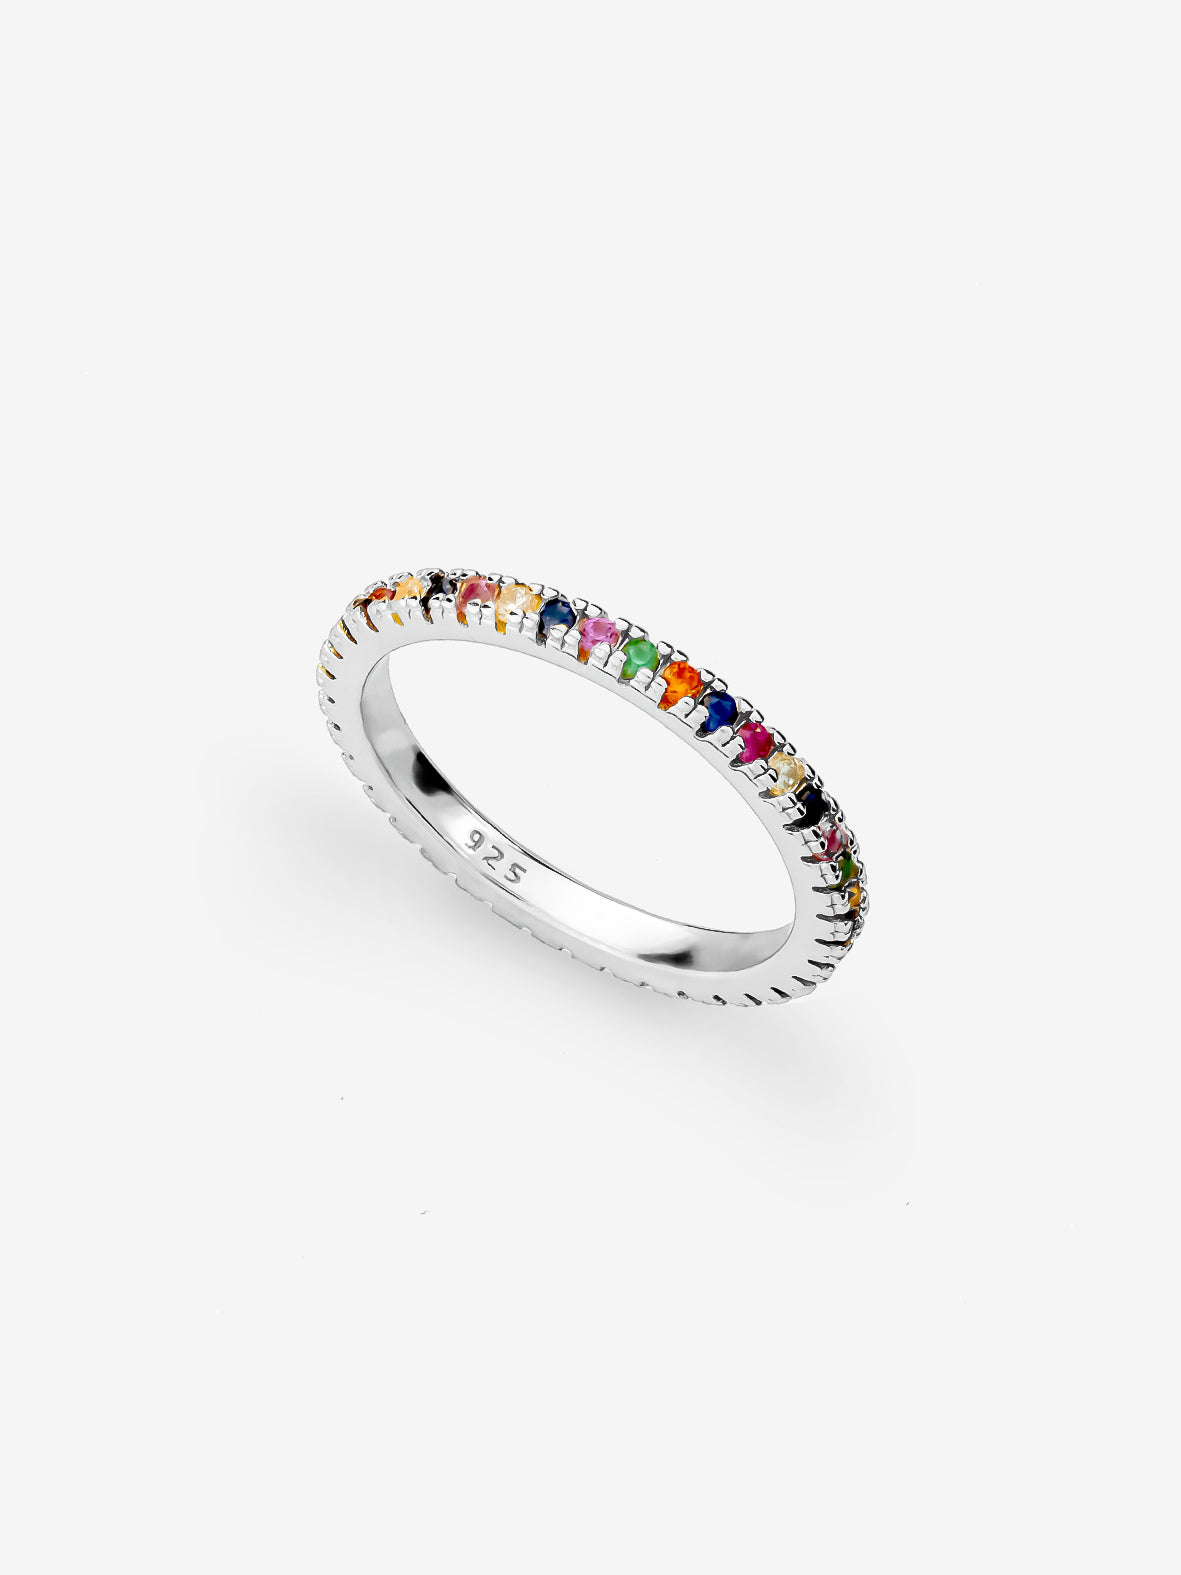 Silver Thin Stacking Ring With Rainbow Stones